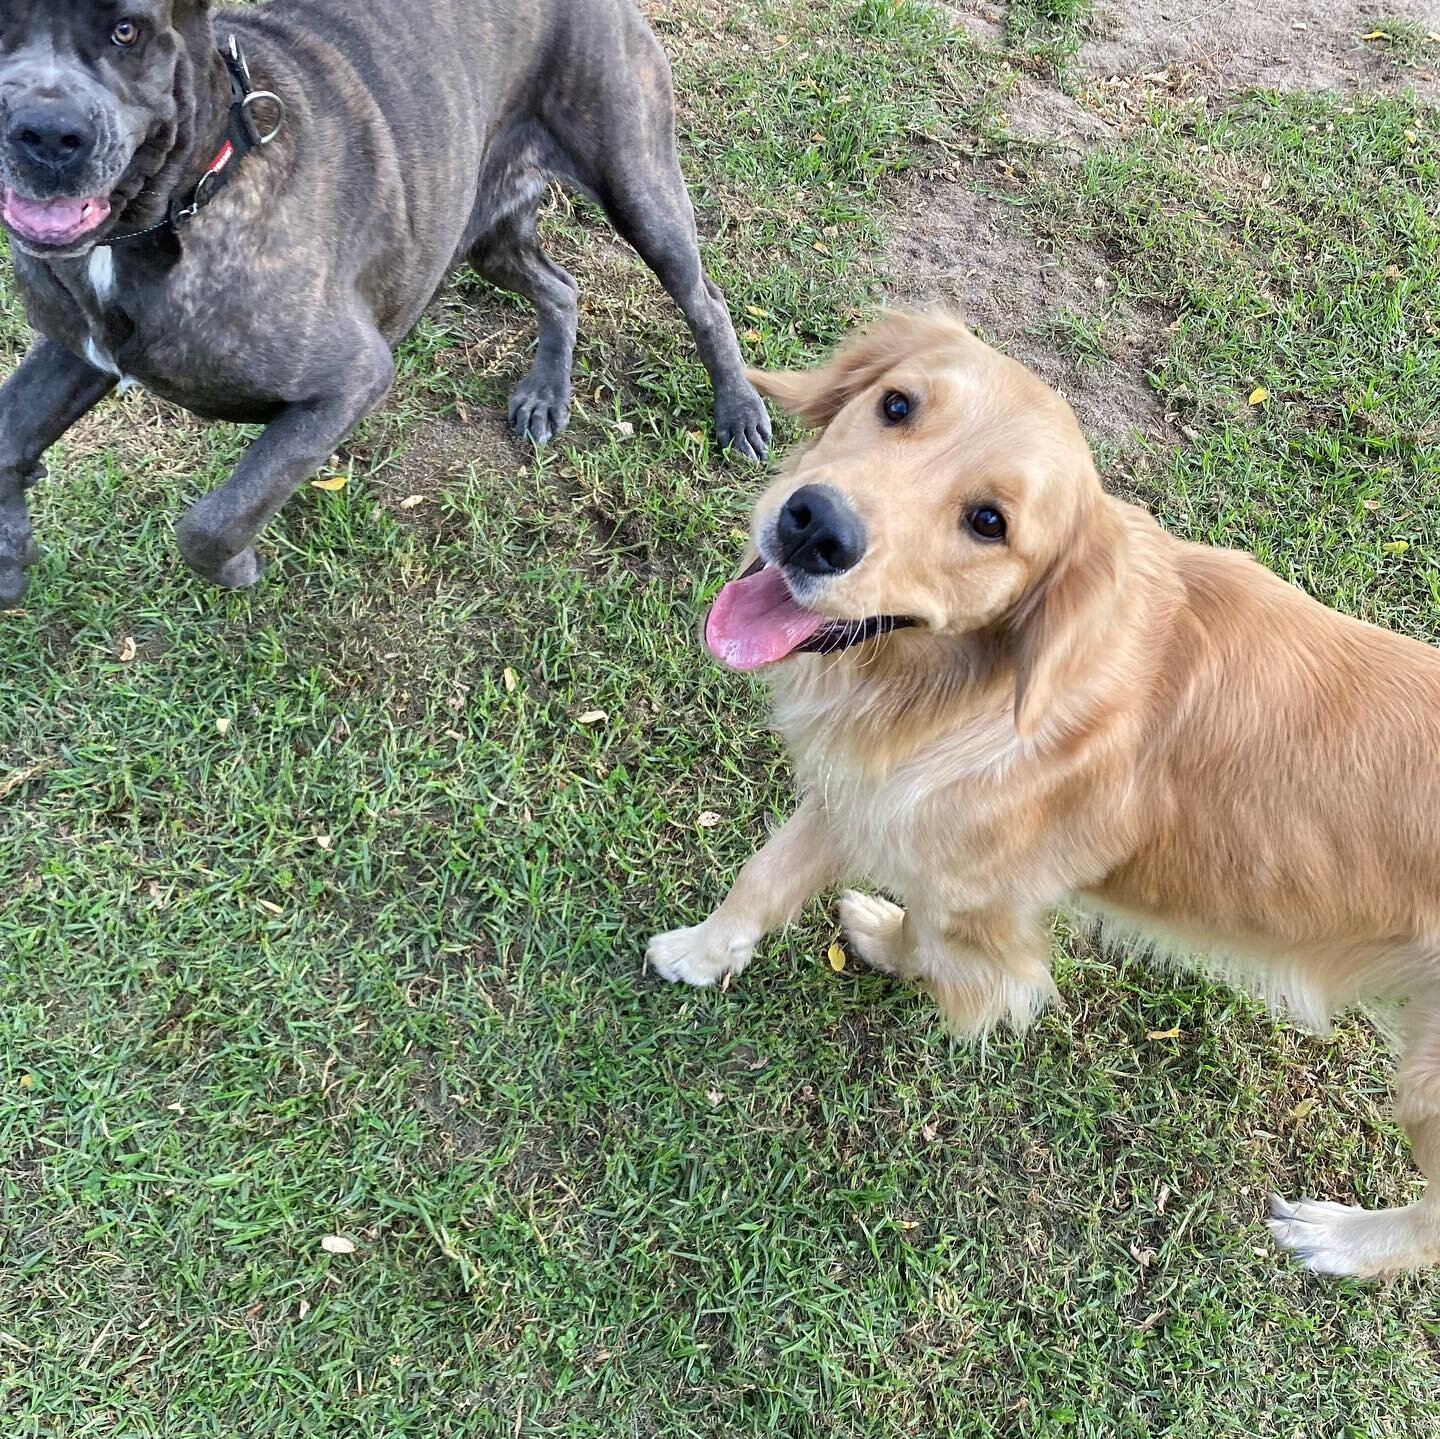 Shunti-Bear and Frankie - soul sisters! #canecorso #goldenretriever #dogbestfriends #bedsfortails #dogmatchmakers #dogboarding #welovealldogs